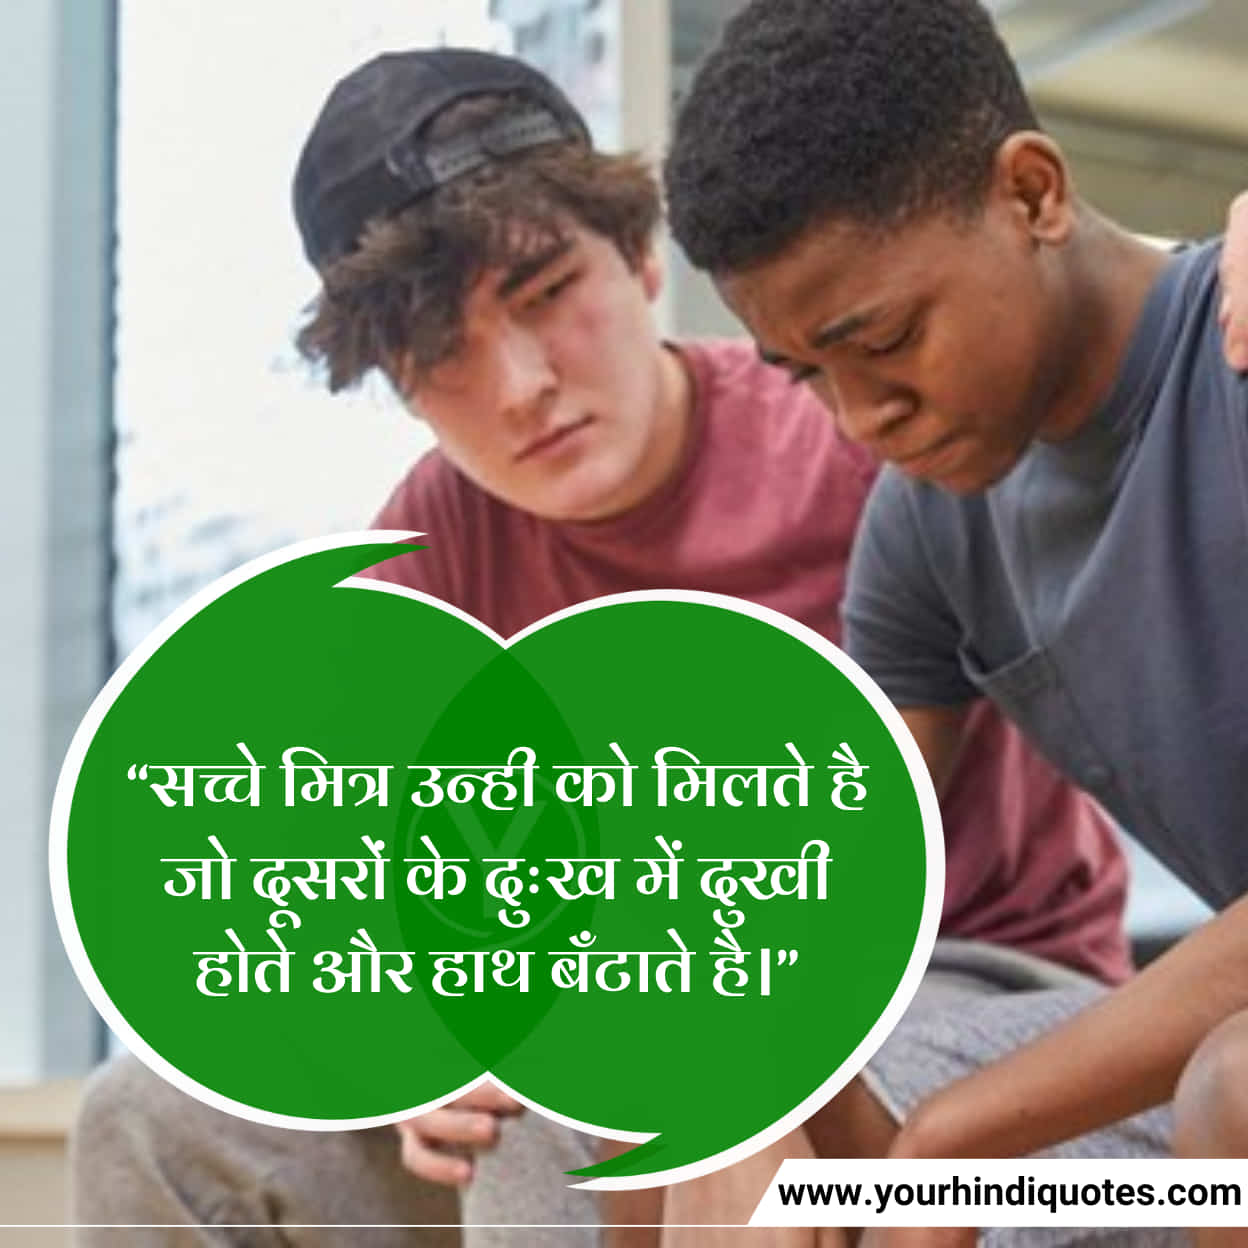 Best Hindi Friendship Day Quotes